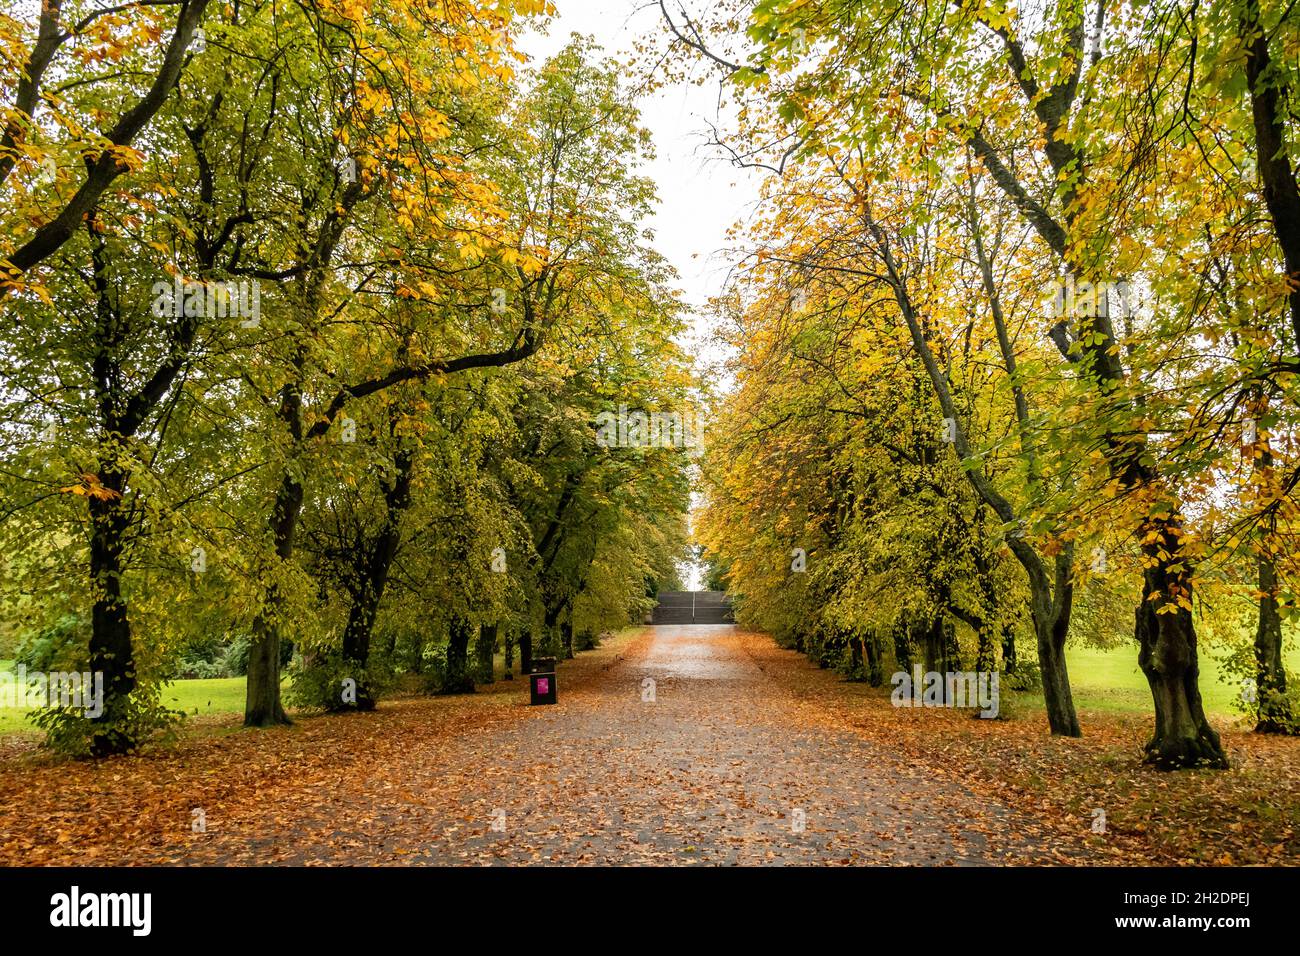 Queen's Park looking south from Victoria Road Entrance. It is the middle of autumn and the footpath is covered in leaves from the overhanging trees. Stock Photo